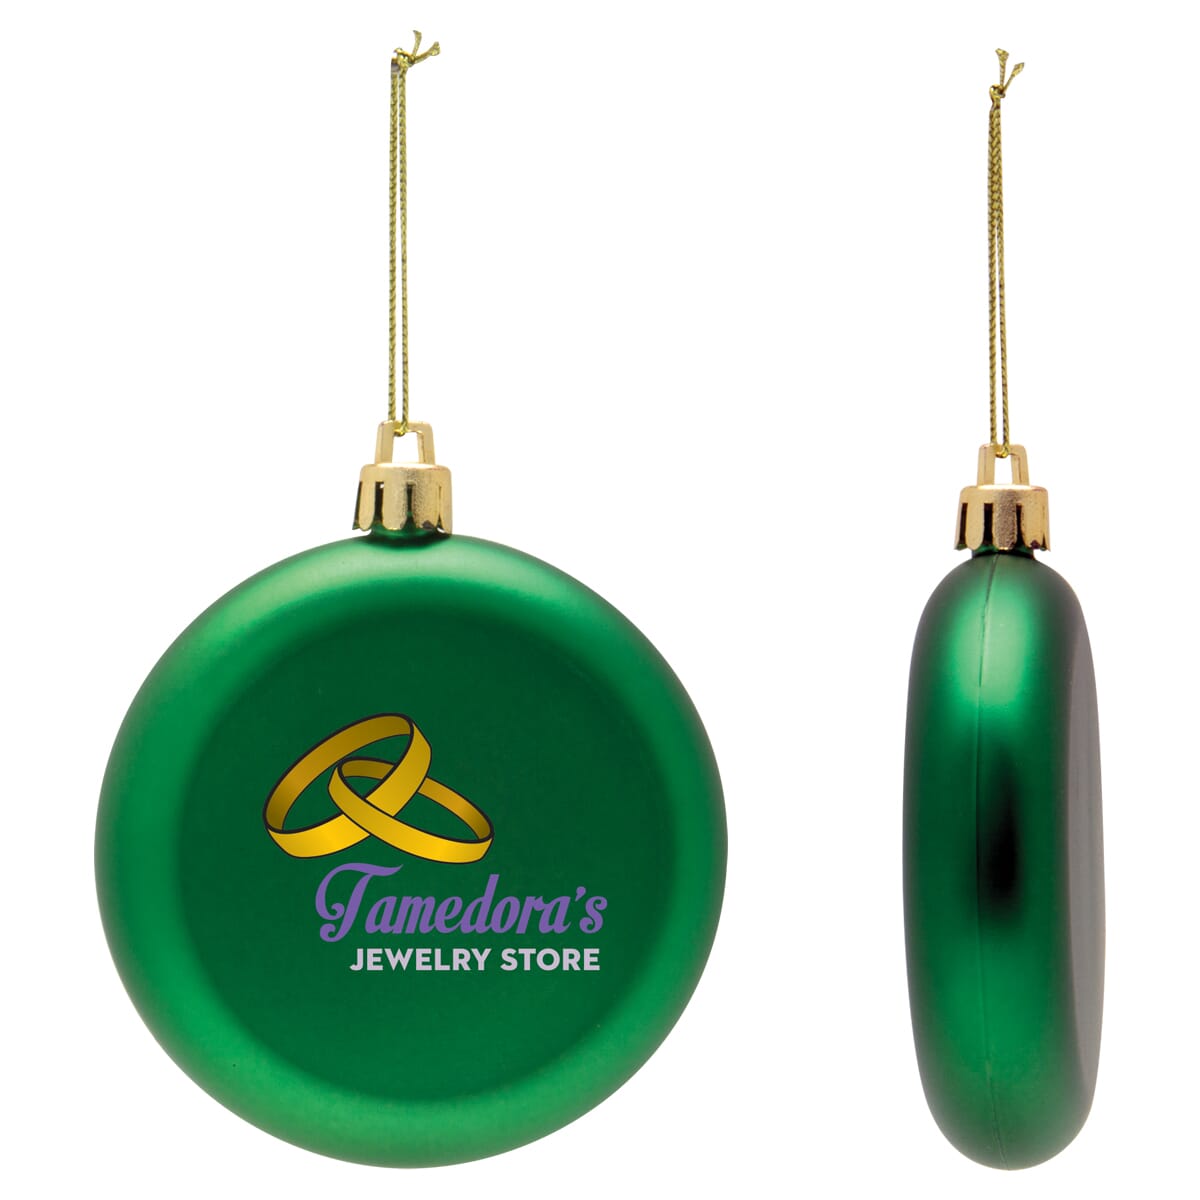 Classic Flat Round Ornament with logo